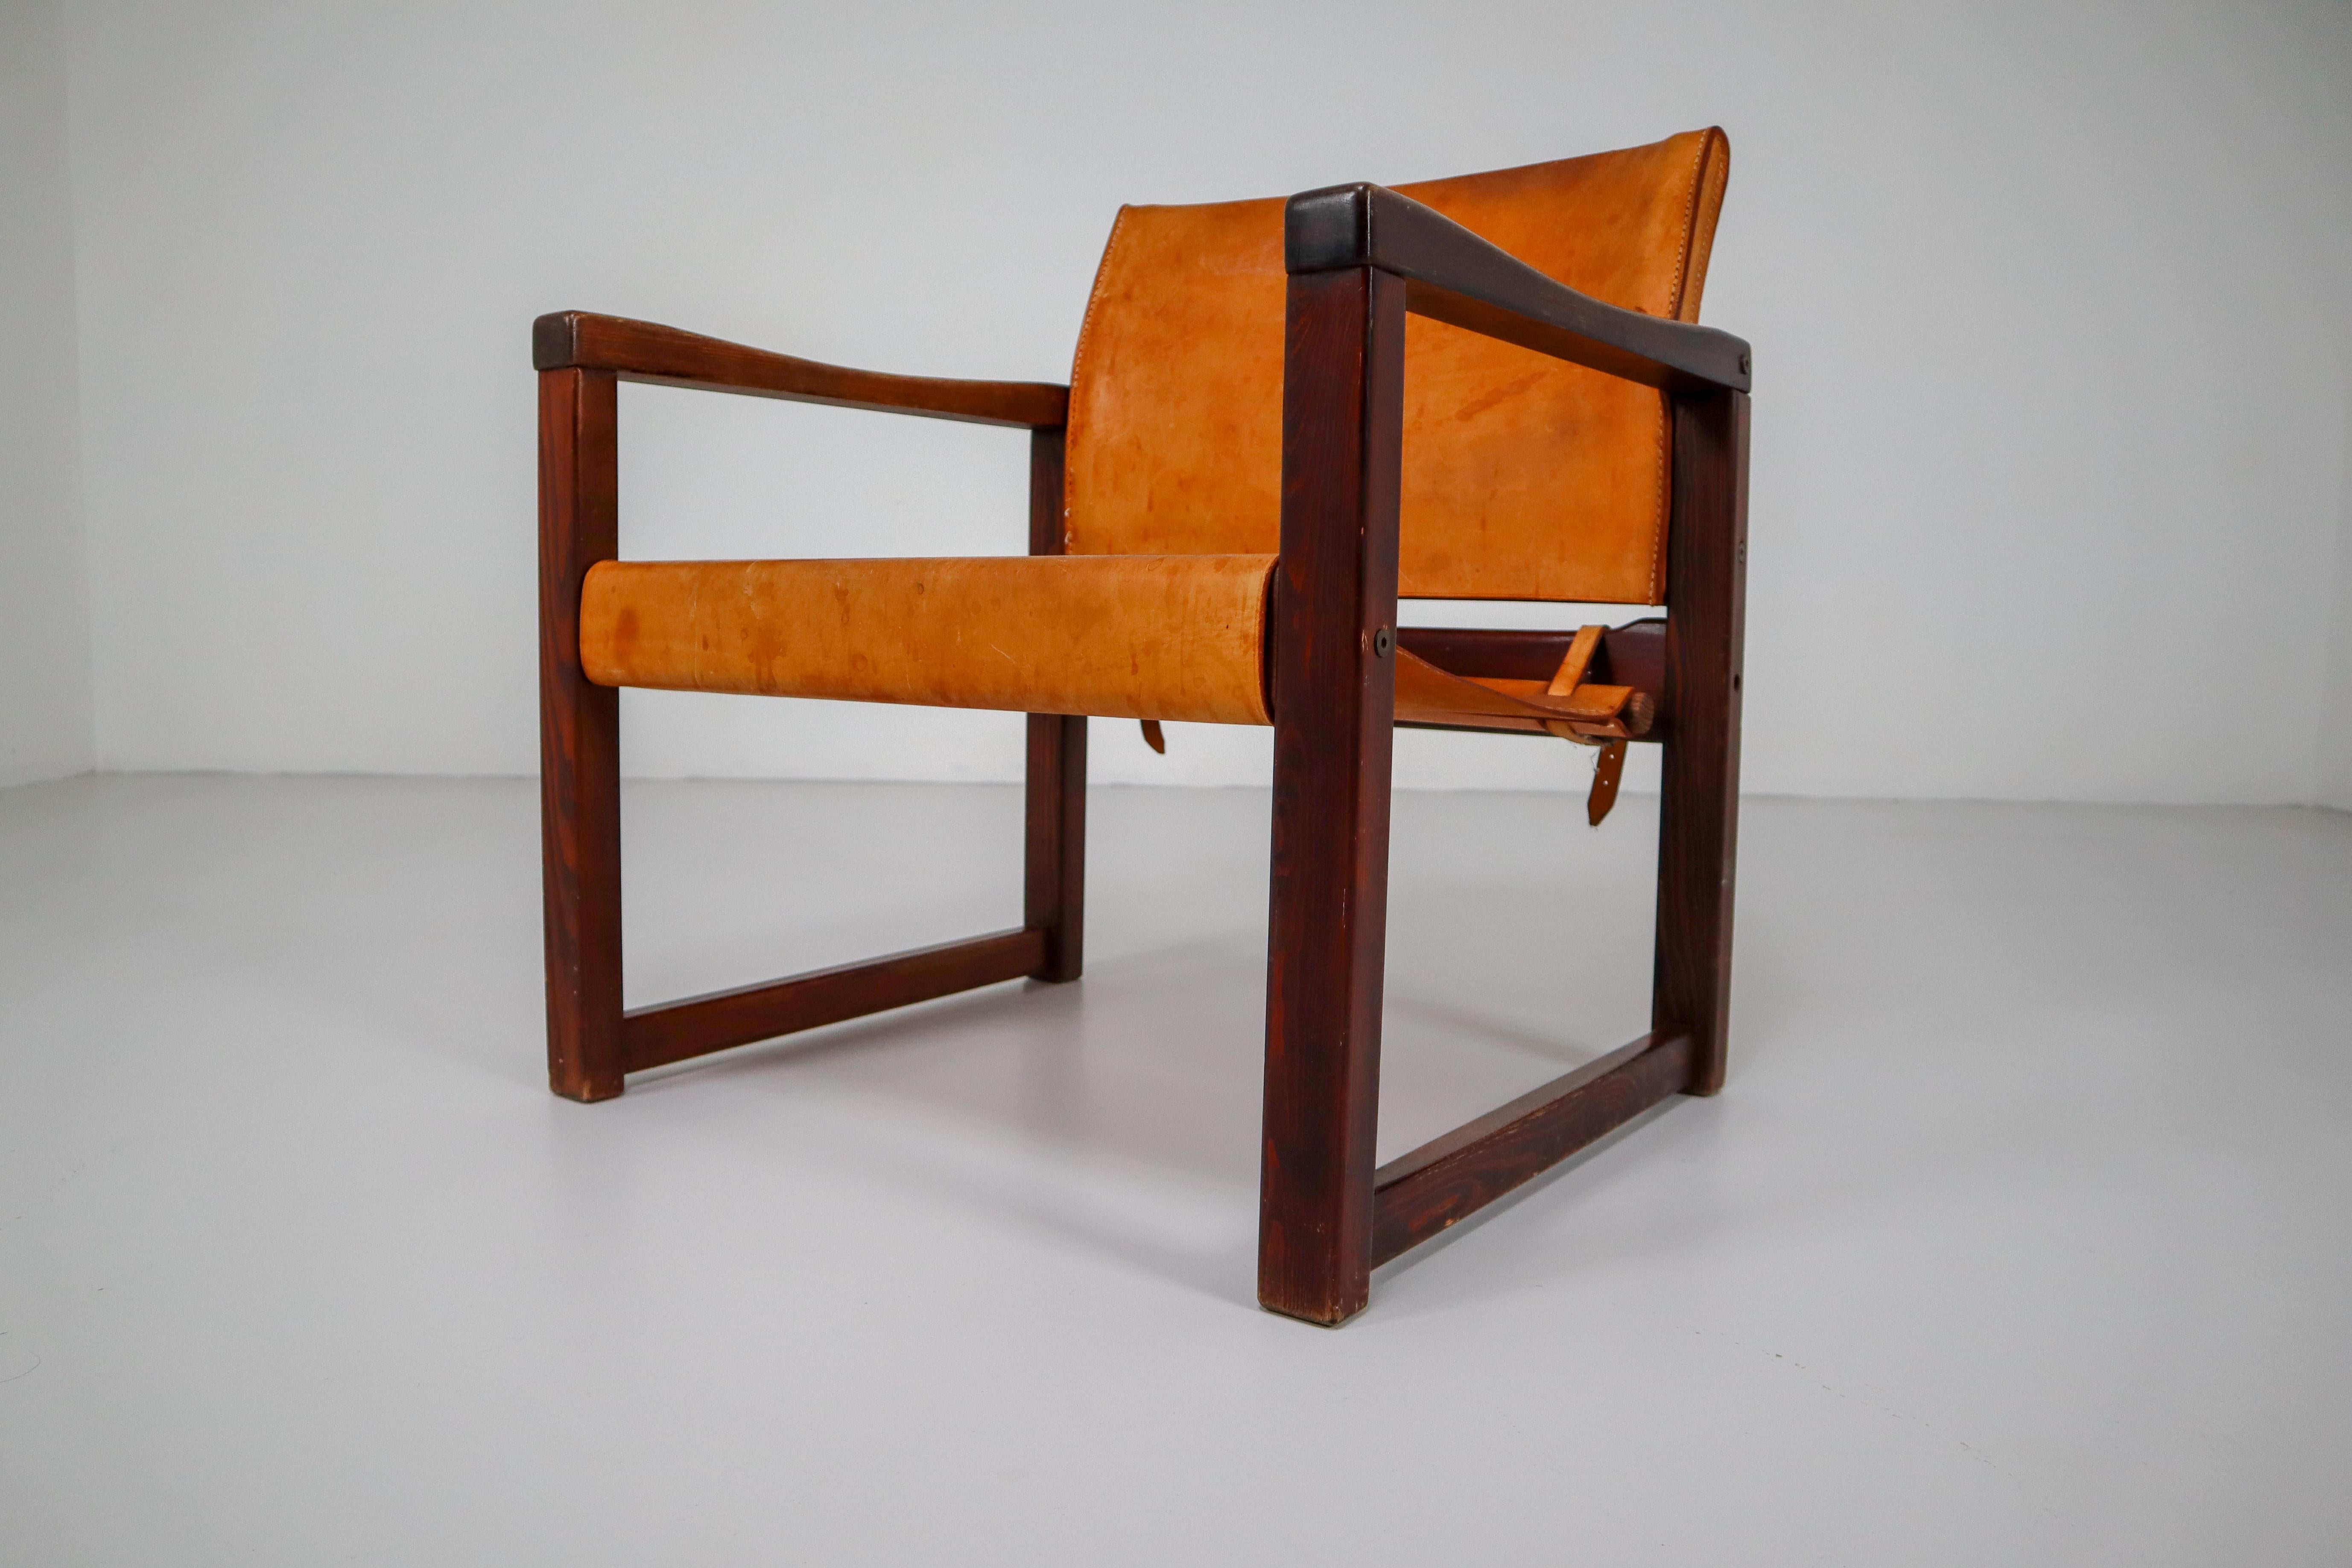 Safari lounge chairs in absolutely gorgeous patinated cognac saddle leather and solid pinewood, circa 1970s. The thick saddle leather is beautifully patinated during use and age and shows interesting stitching. There is a color difference between